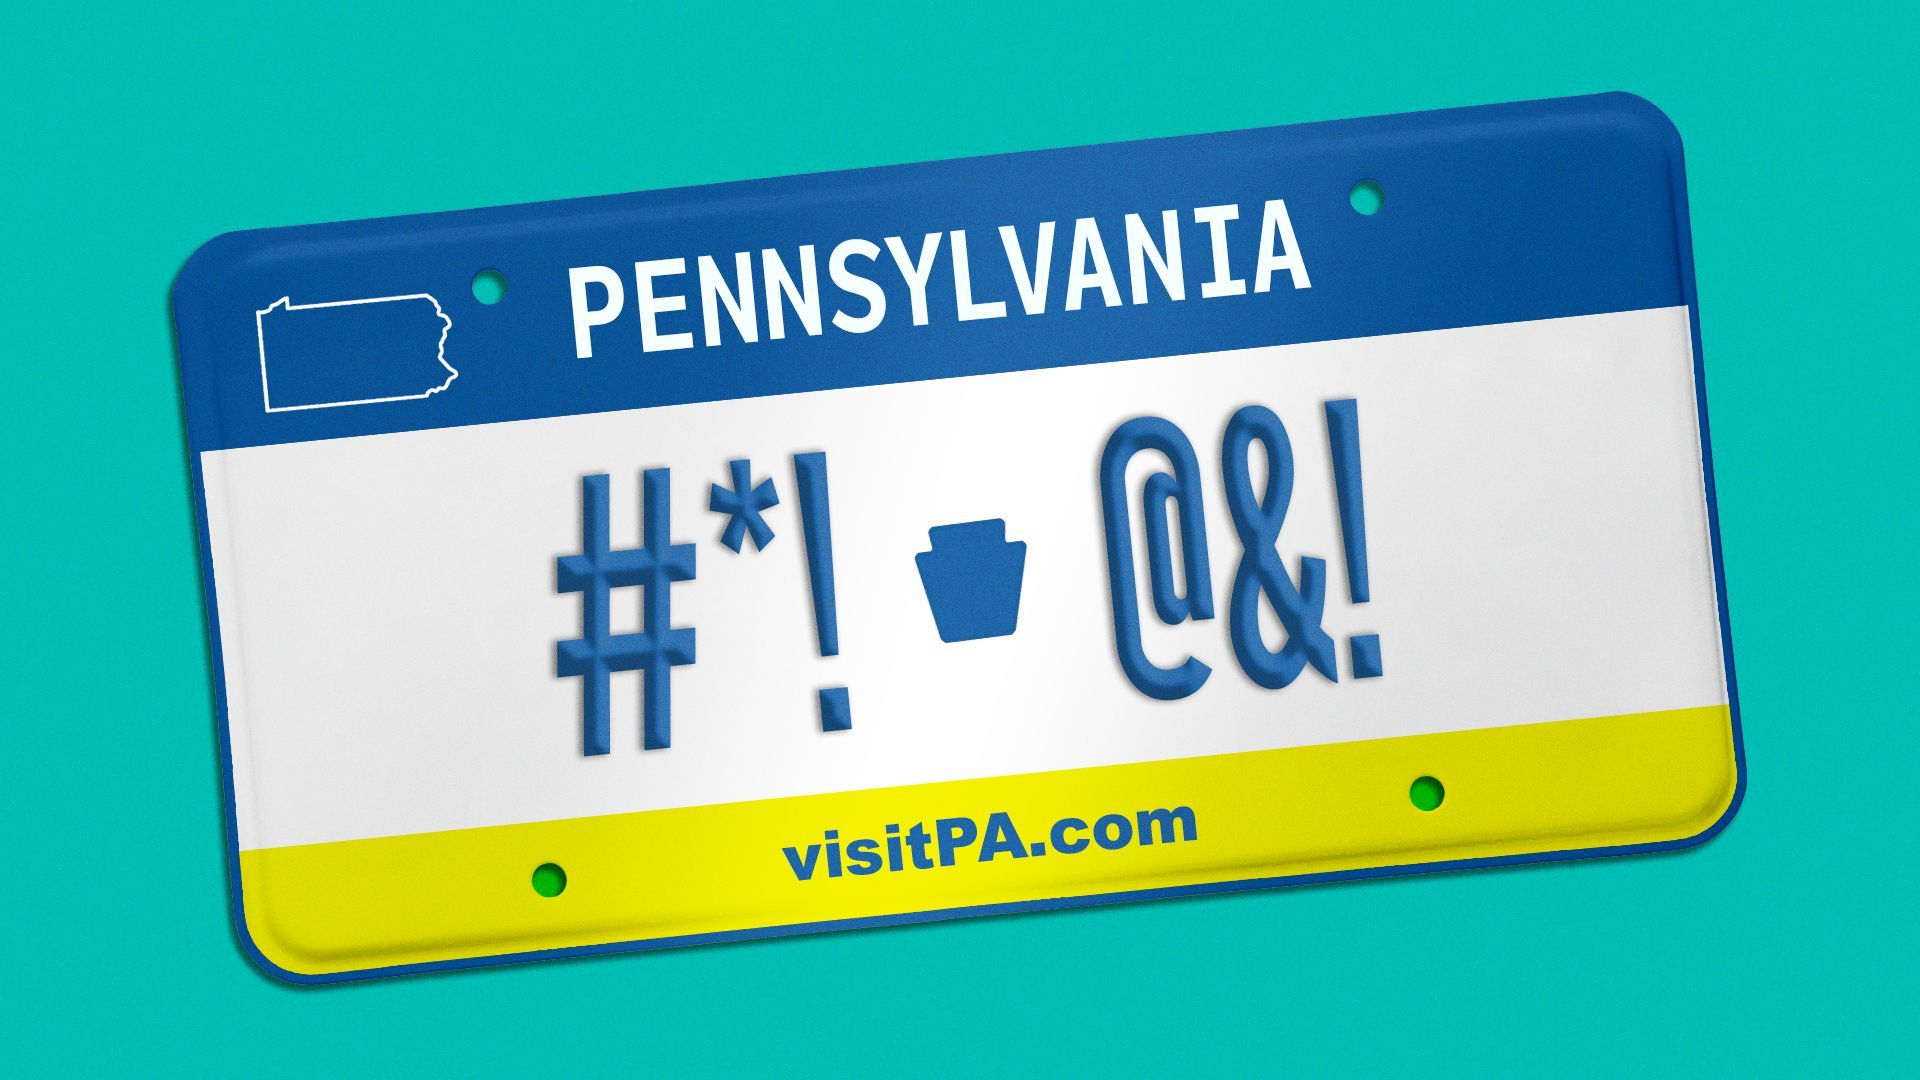 Illustration of a Pennsylvania vanity license plate with symbols implying a swear word.